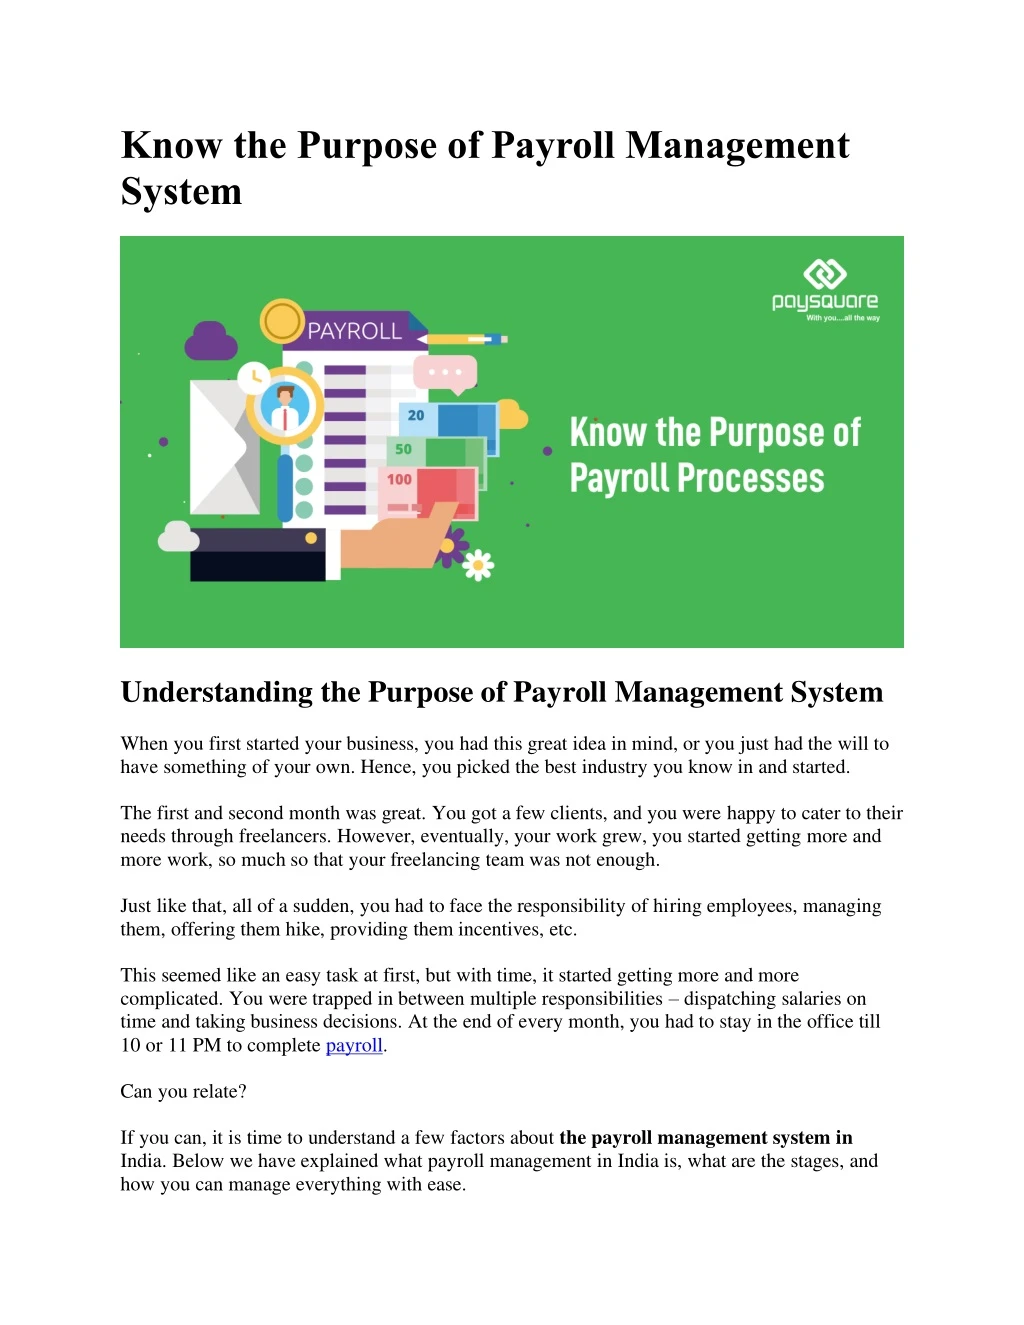 know the purpose of payroll management system